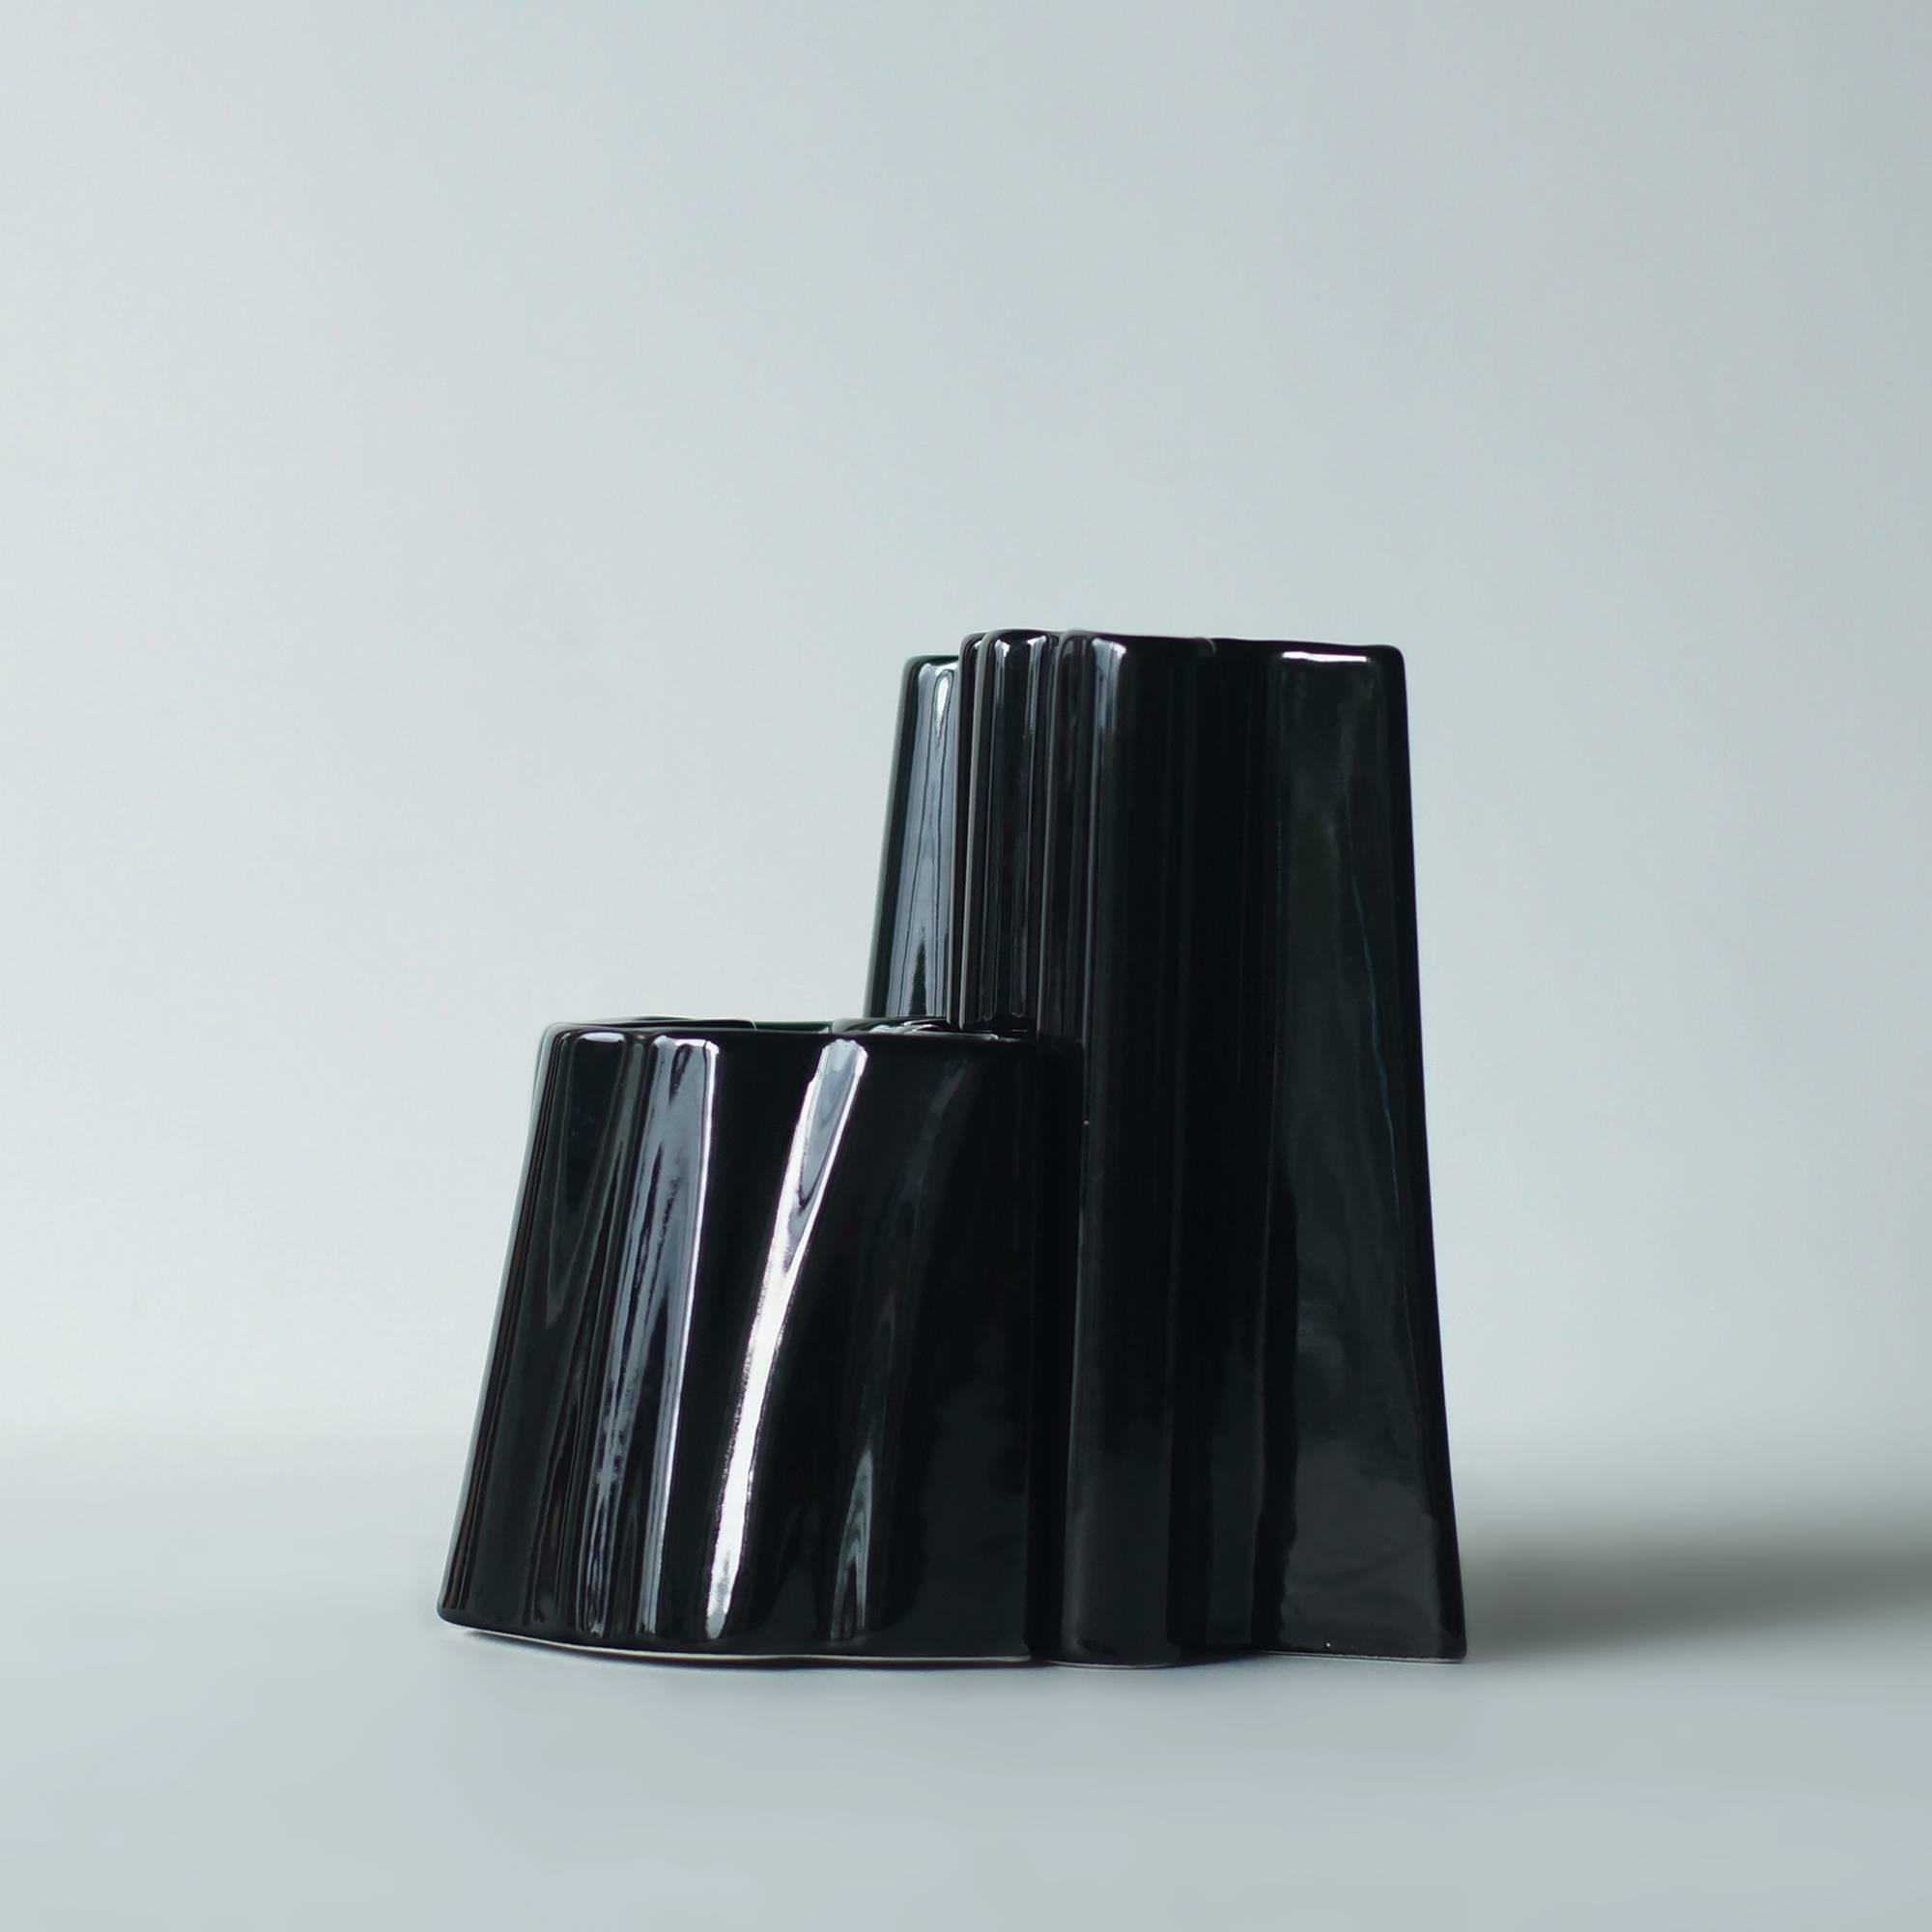 Sergio Asti's flower vase for Gabbianelli probably in the 1960s-1970s. Two separate vases stand close to each other.